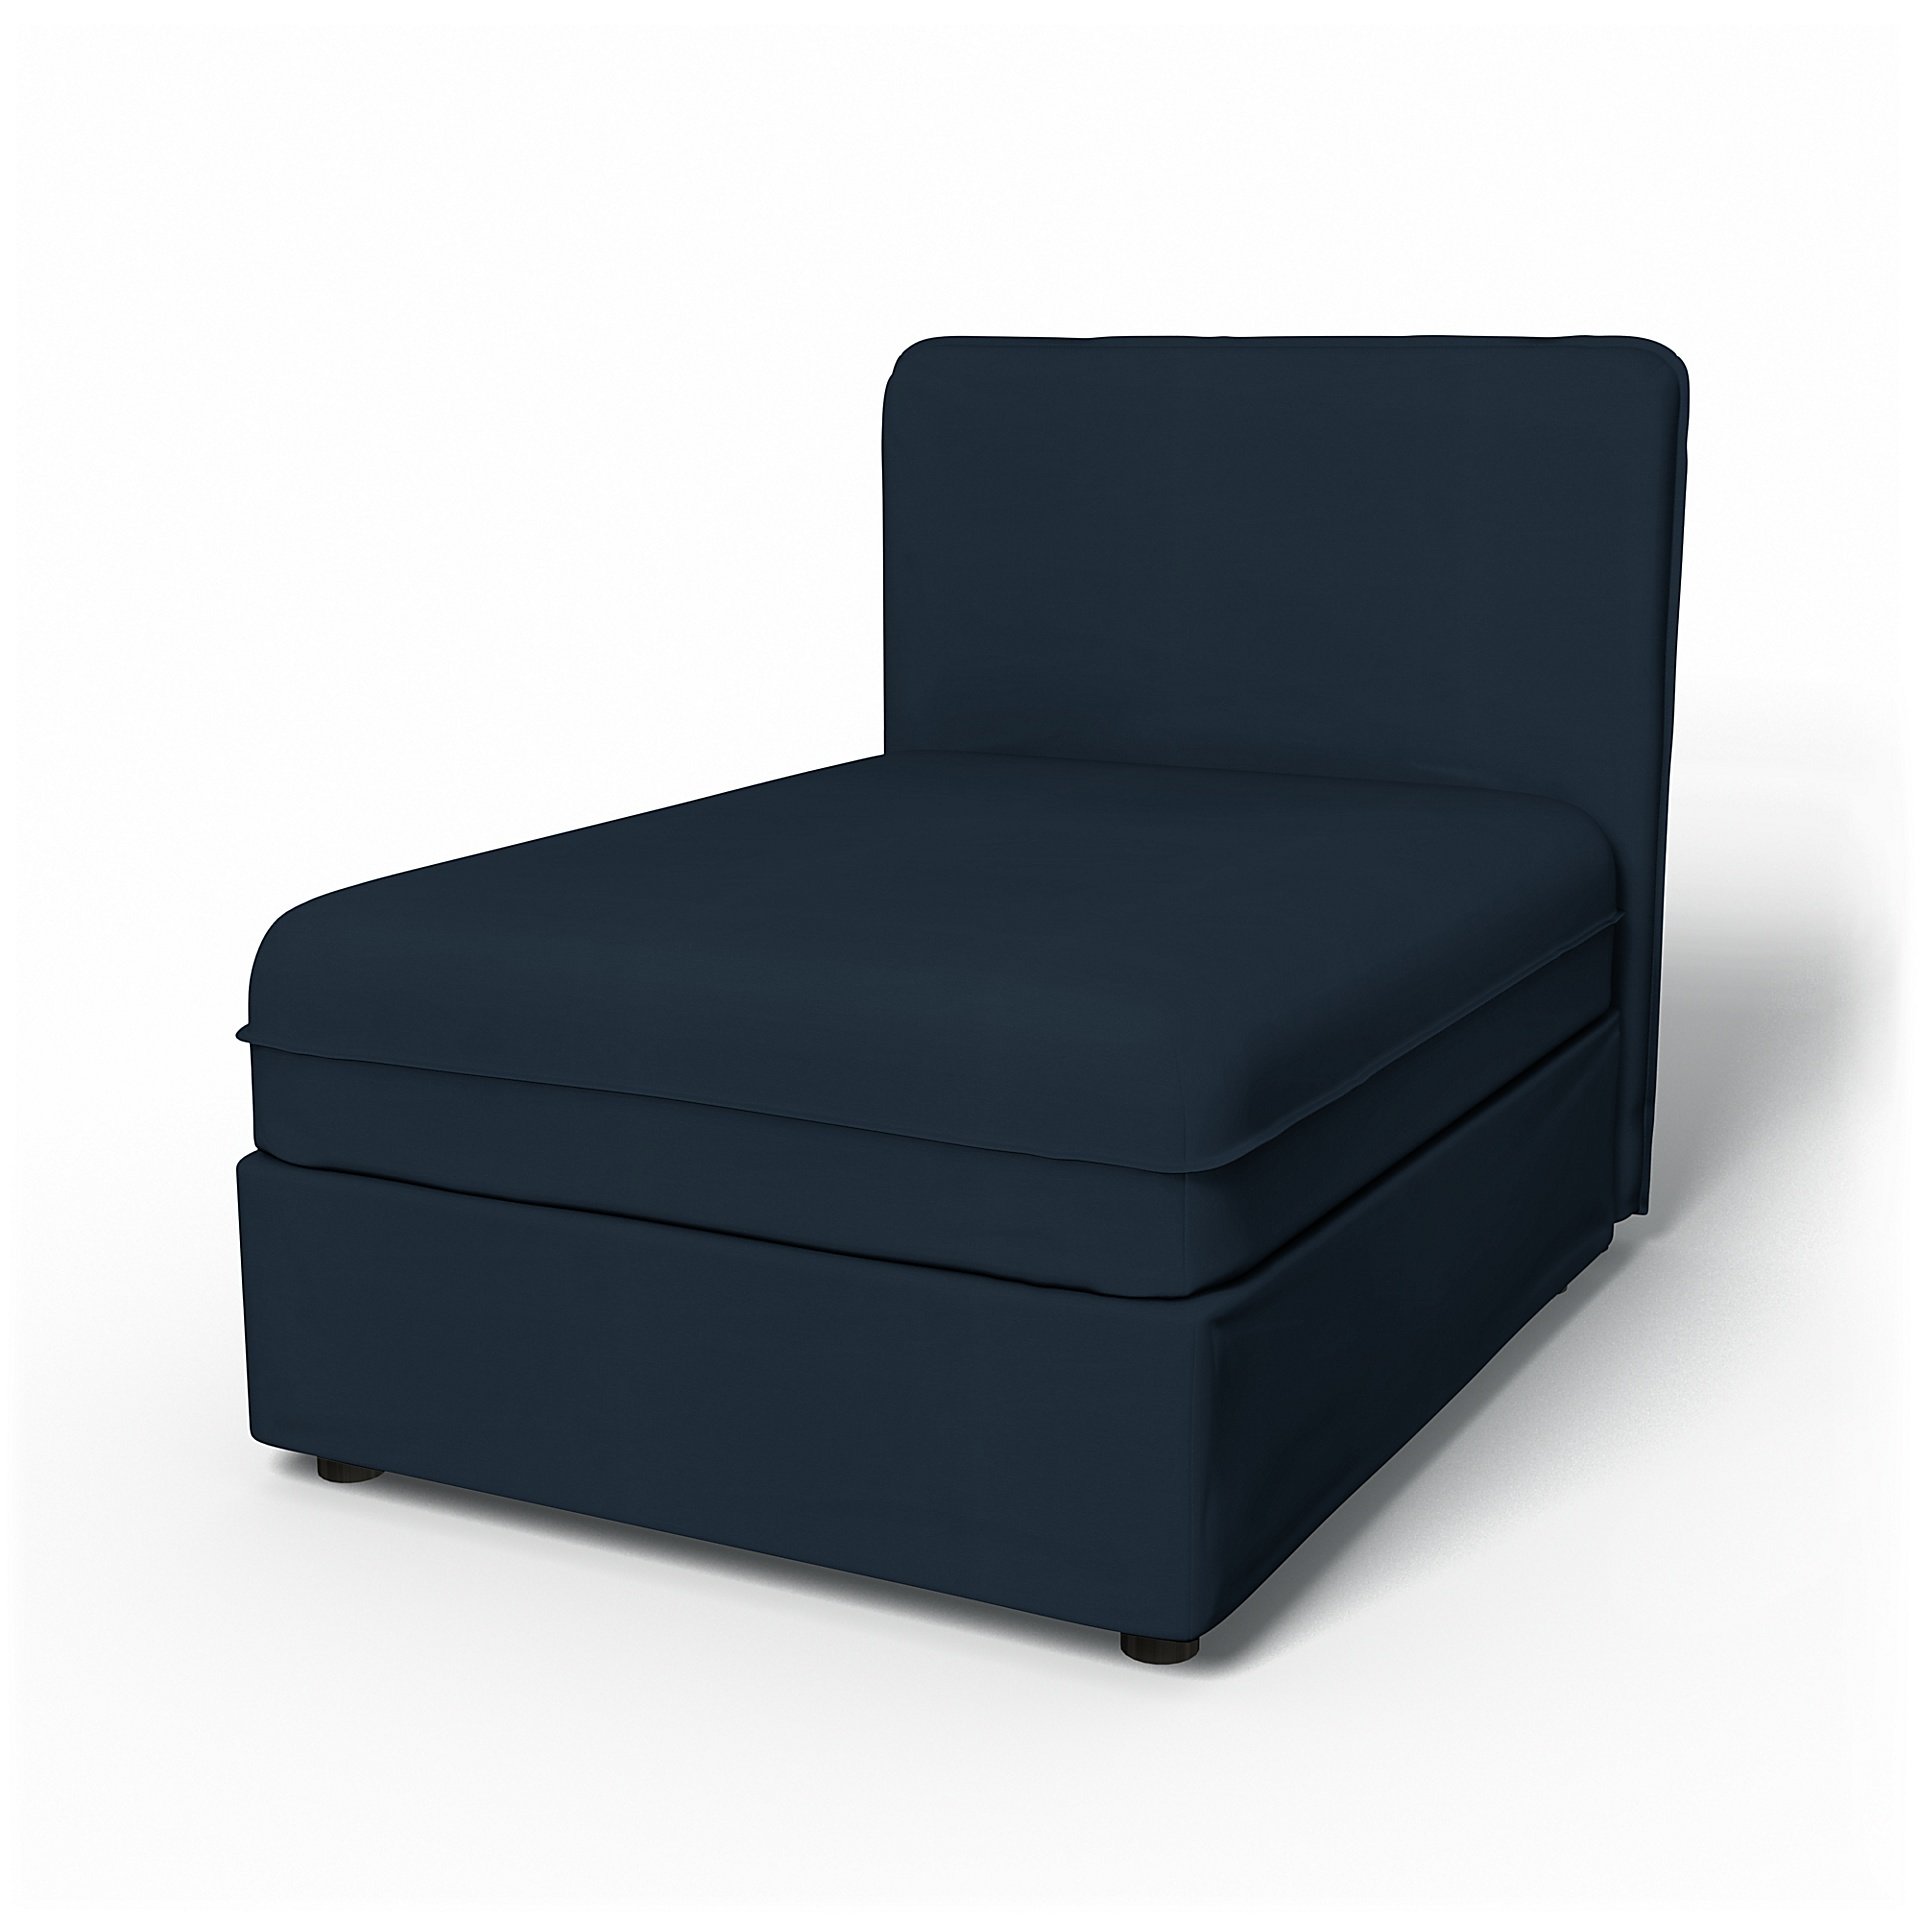 IKEA - Vallentuna Seat Module with Low Back Cover 80x100cm 32x39in, Navy Blue, Cotton - Bemz